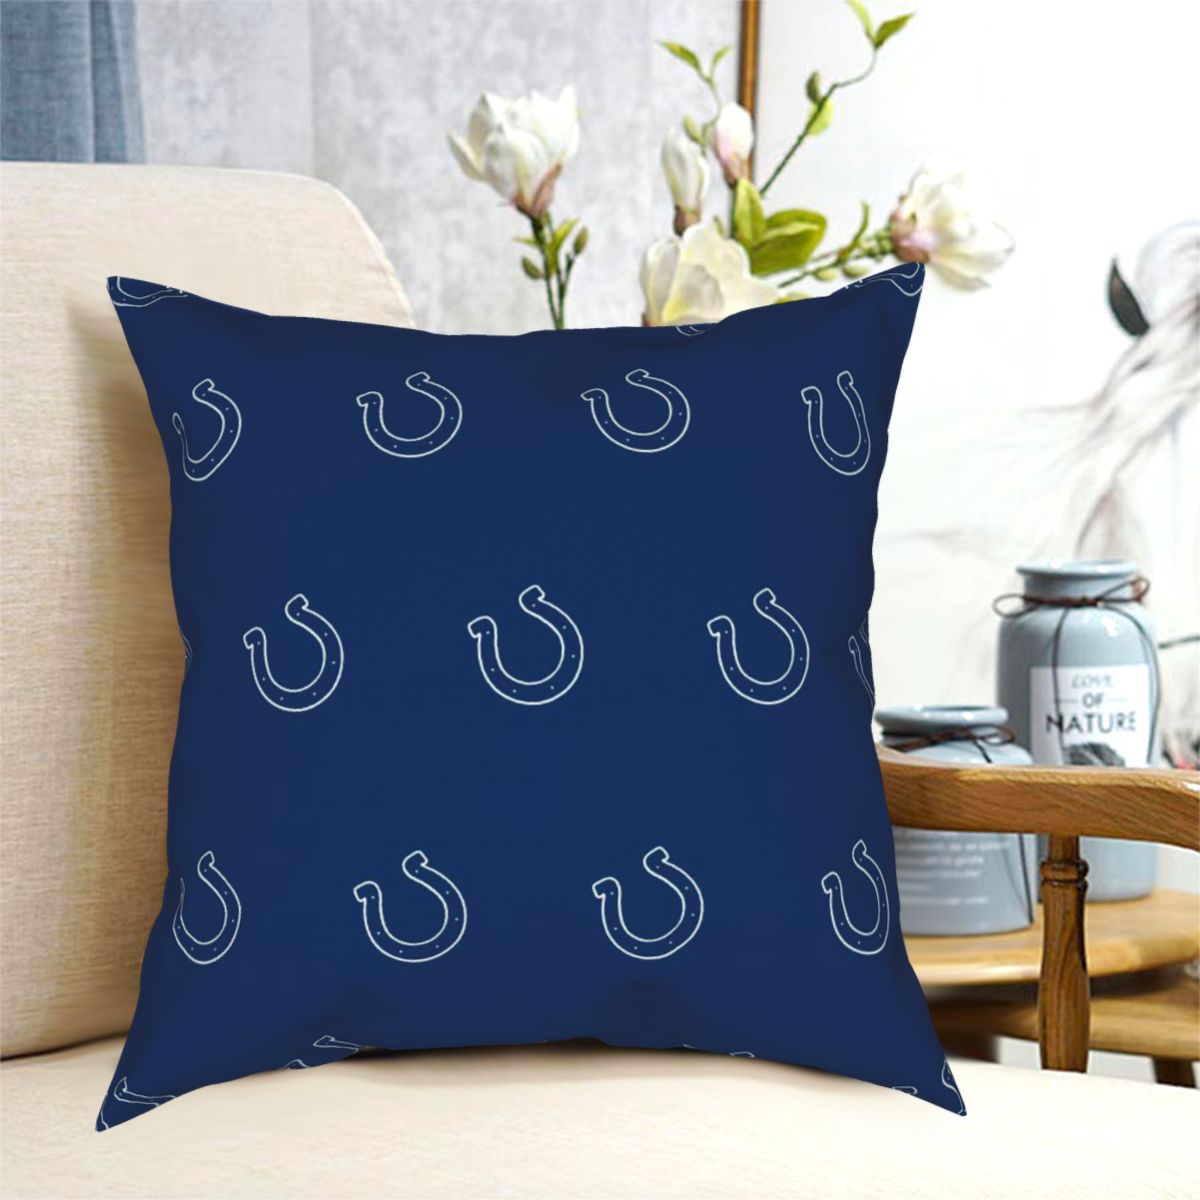 Custom Decorative Football Pillow Case Indianapolis Colts Pillowcase Personalized Throw Pillow Covers